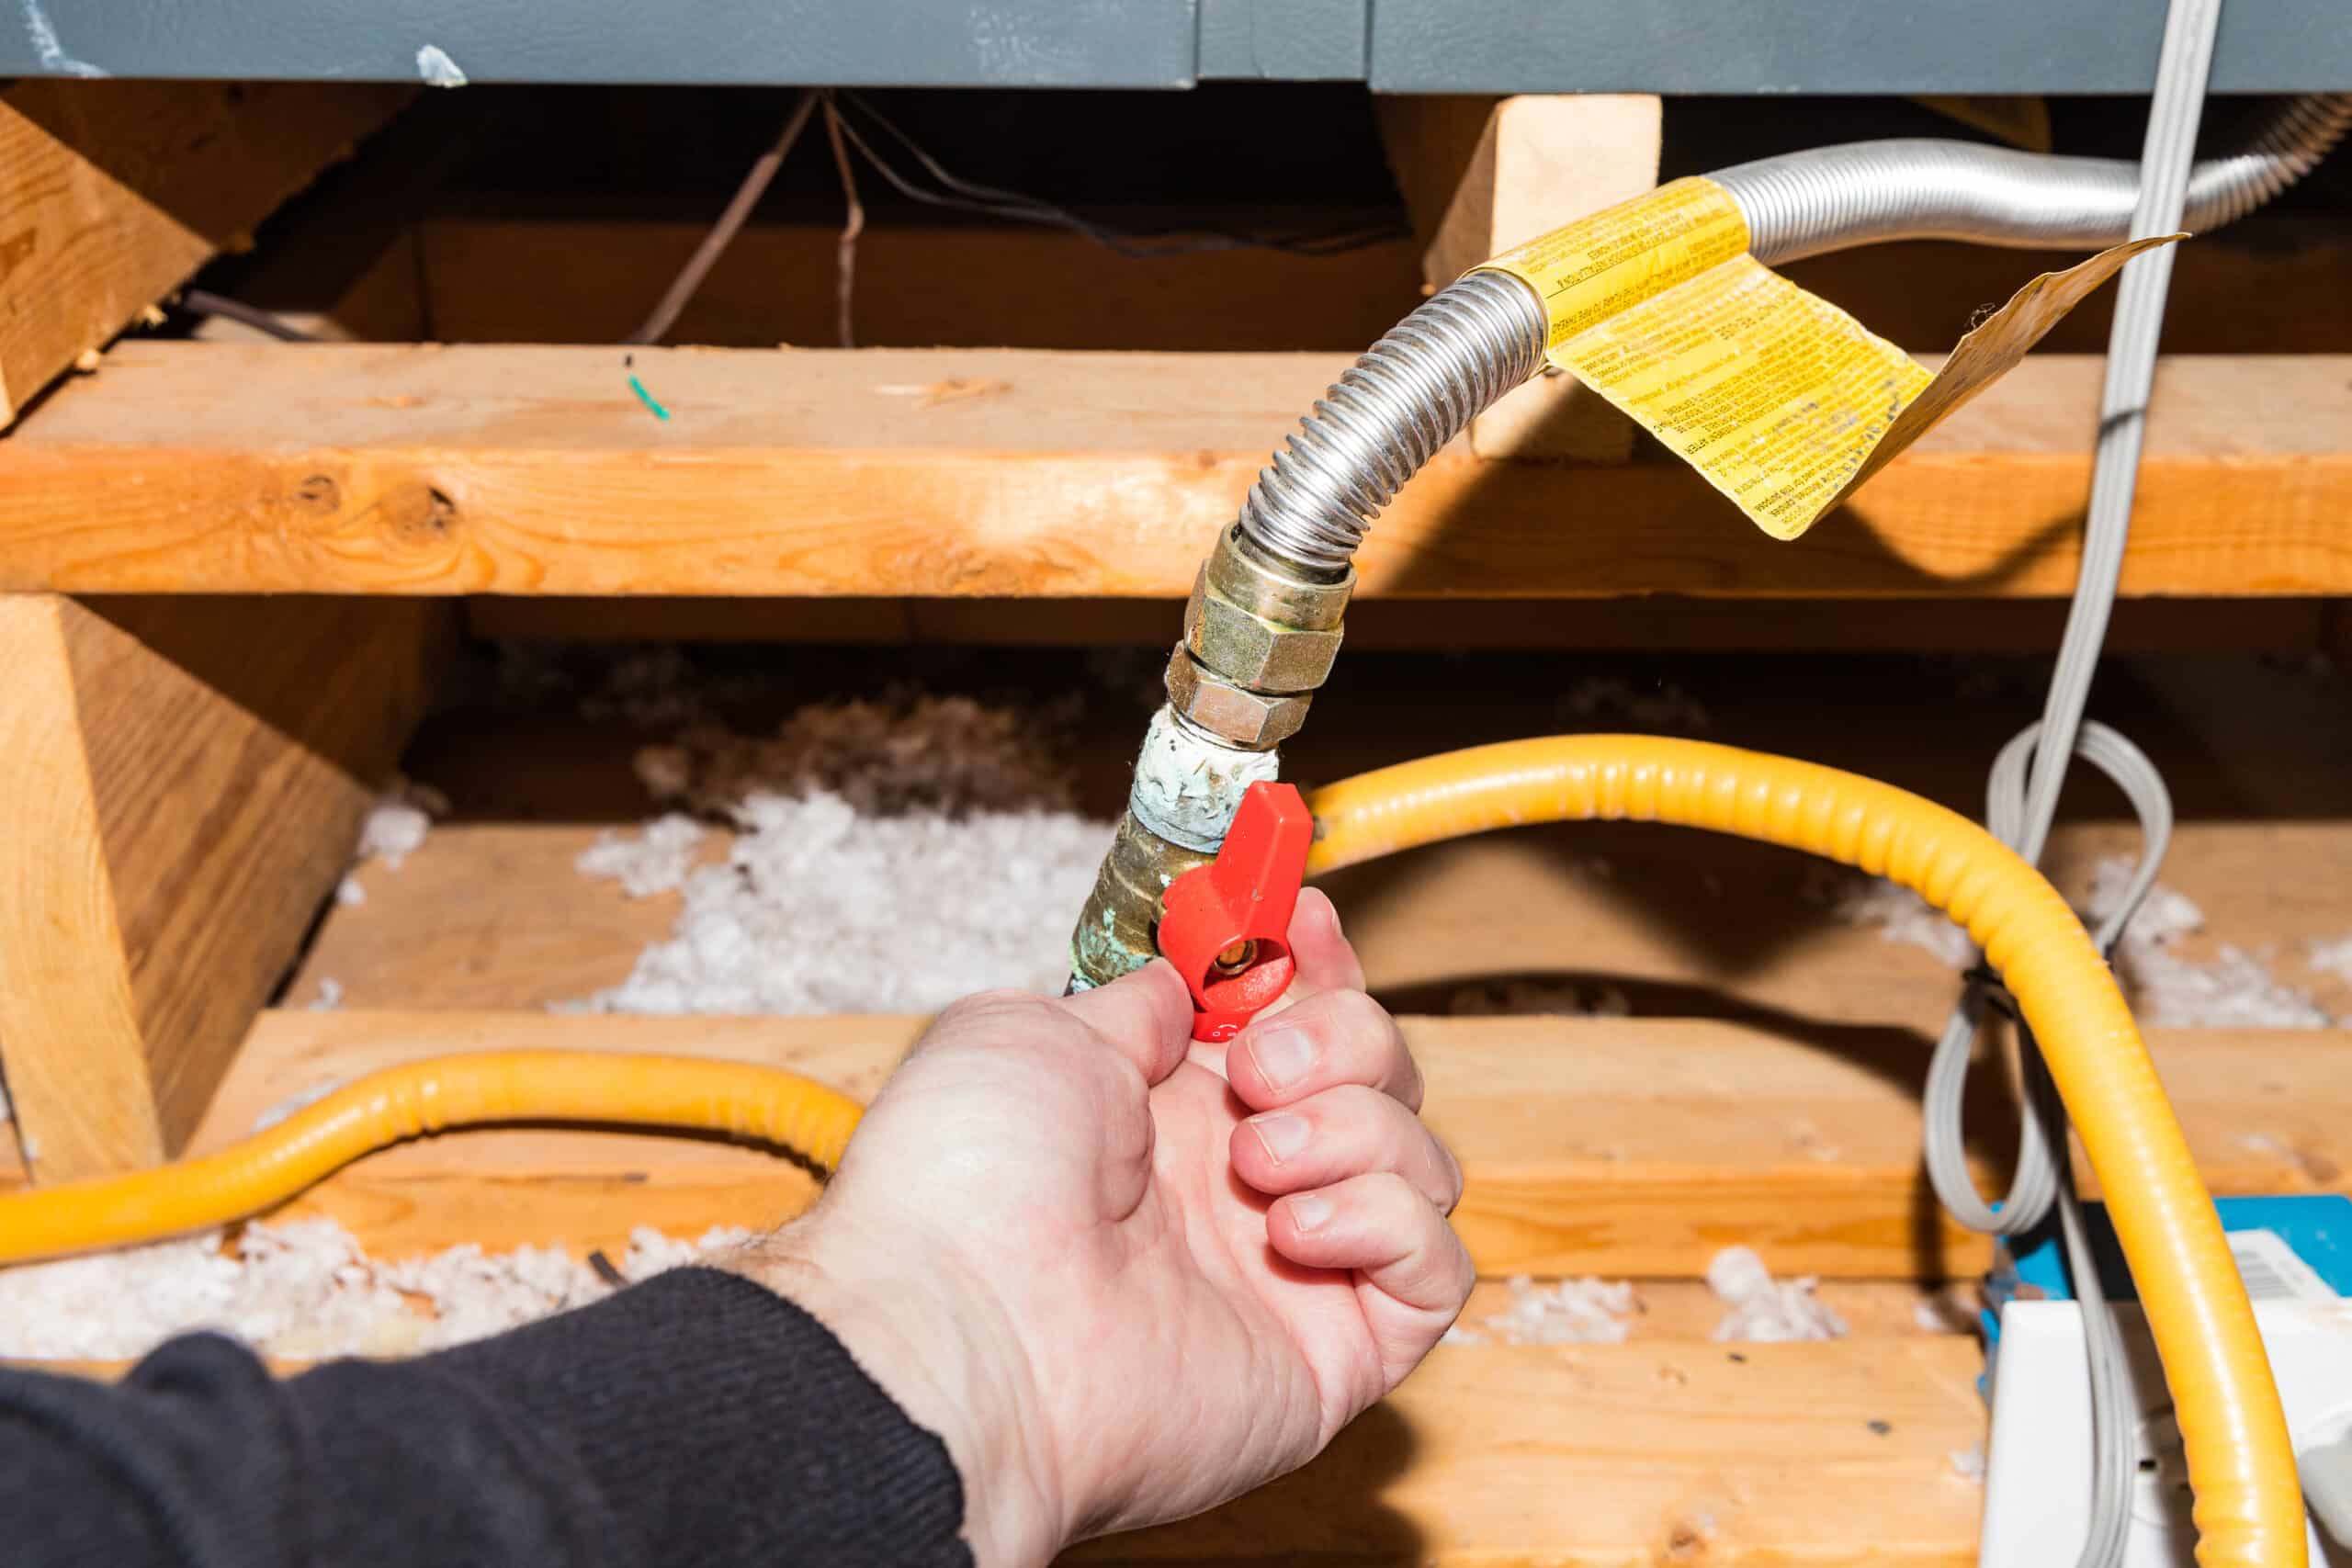 What You Need To Know About Gas Line Sealants